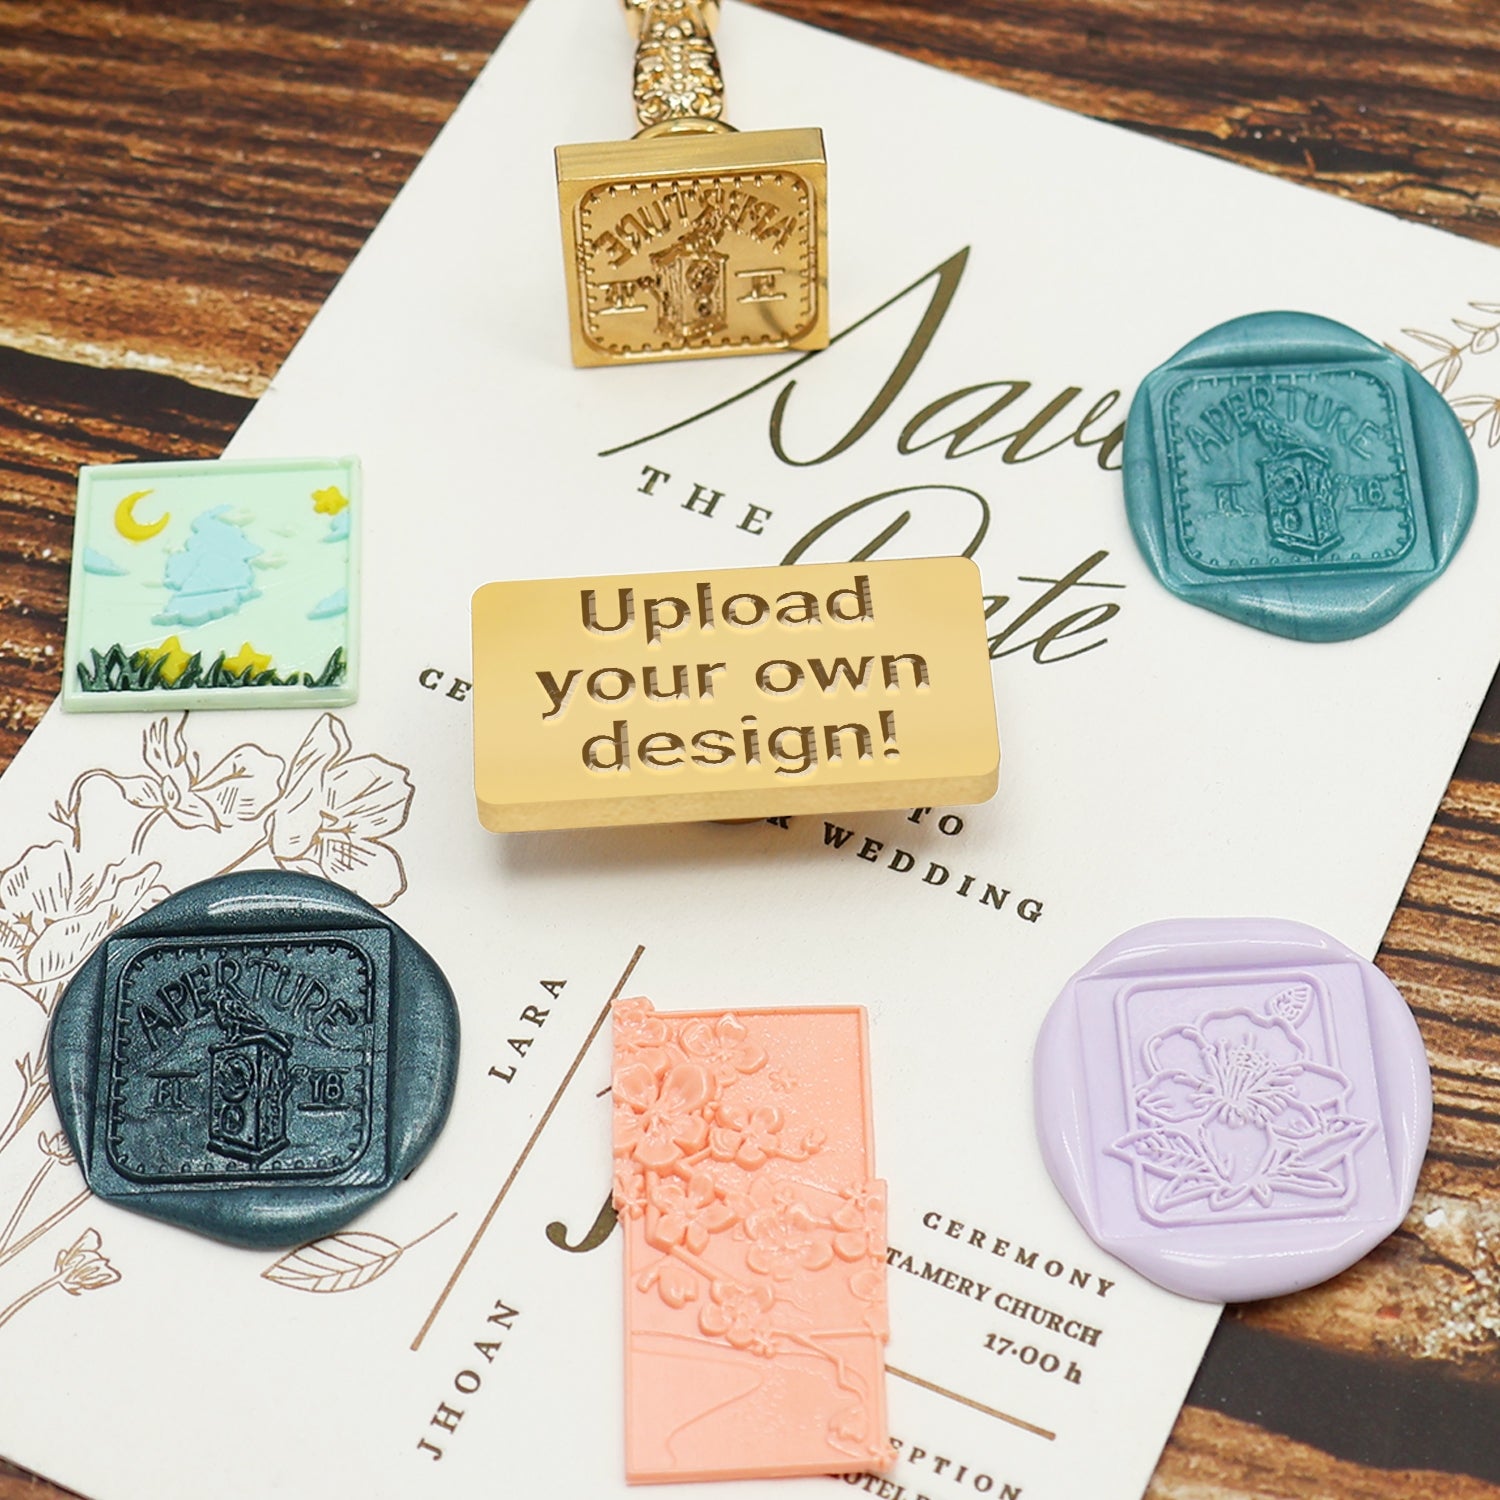 Custom Wax Seal Stamp - Rectangular & Square Fully Customized Wax Seal Stamp with Your Own Artwork